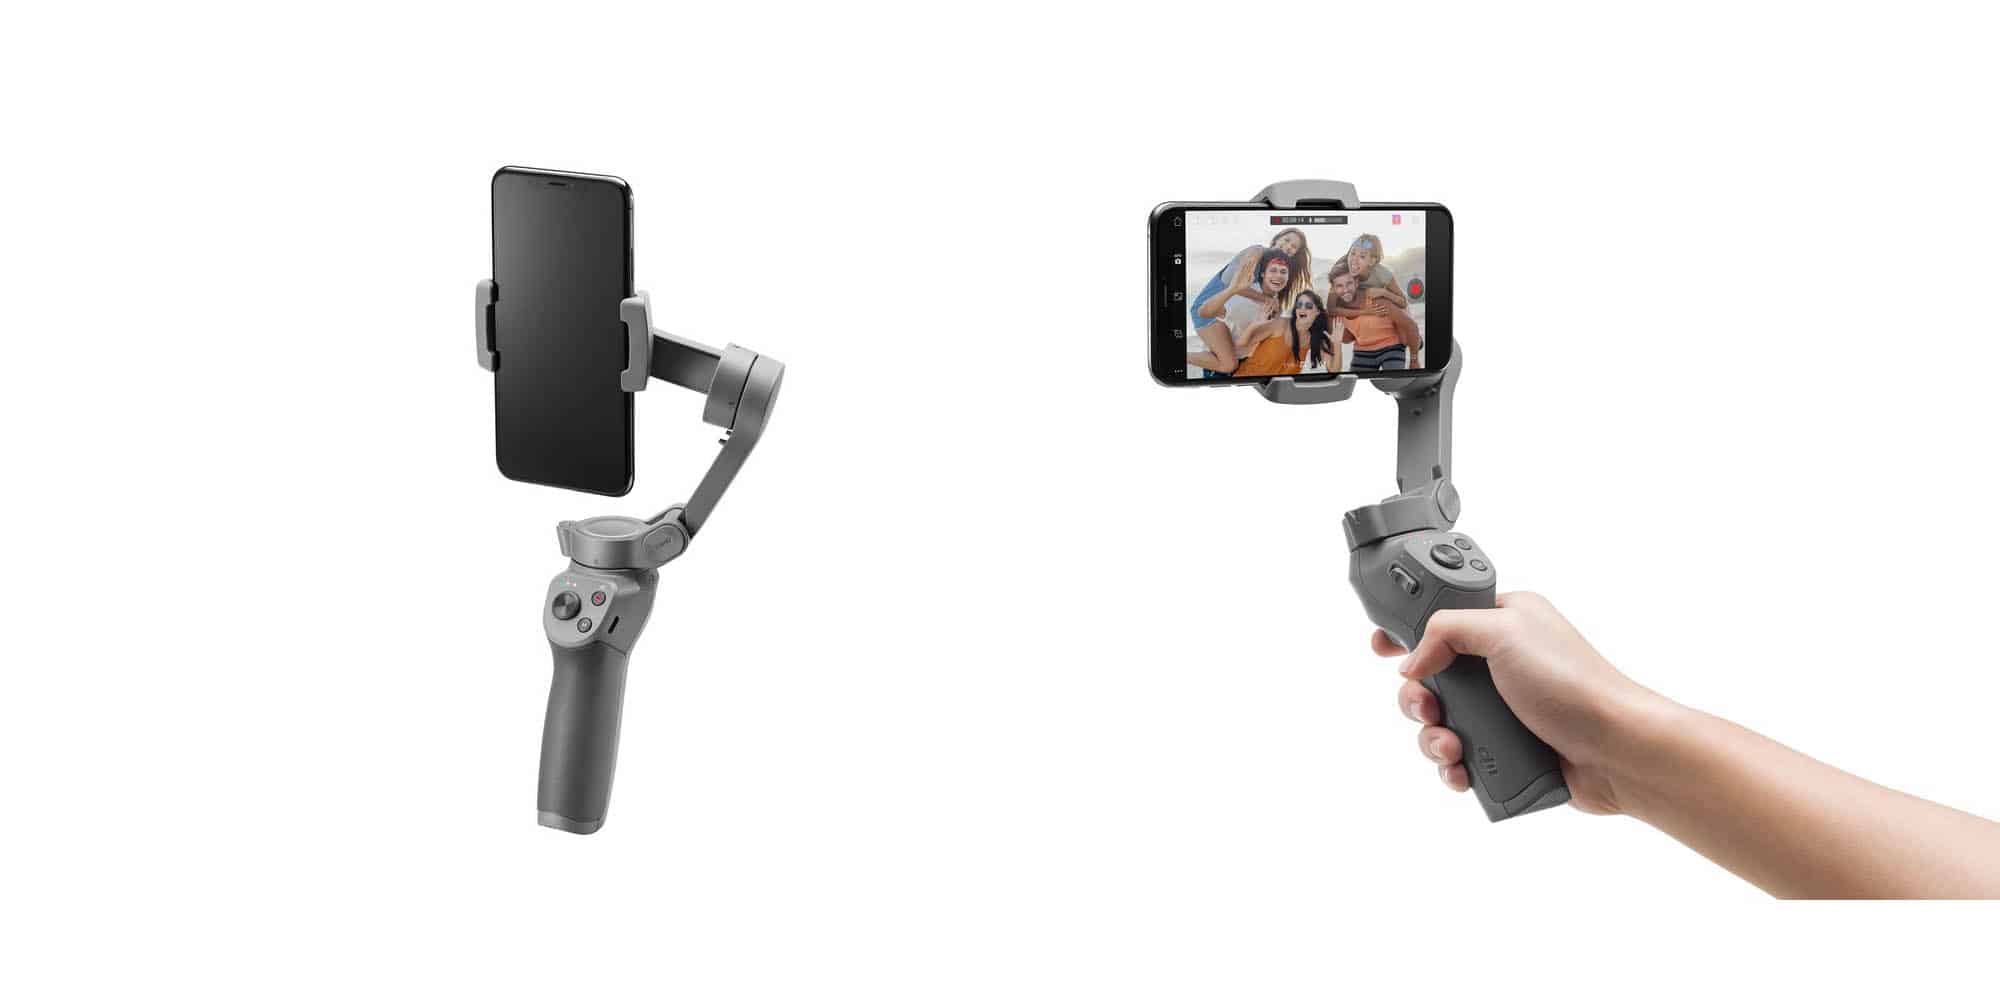 DJI Osmo Mobile 3 Review: Is The New Folding Design A Game Changer? -  Capture Guide